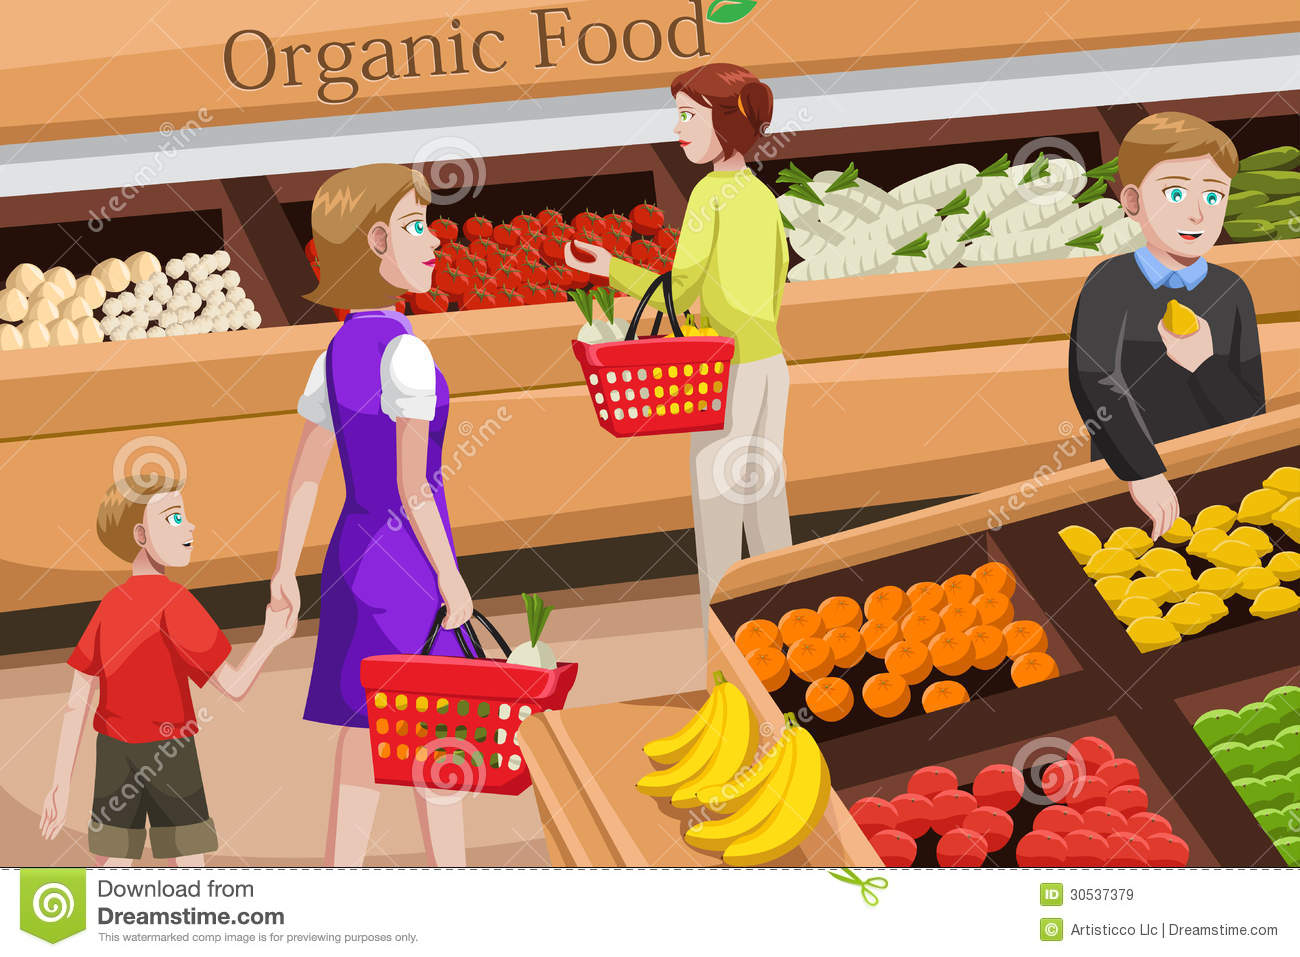 People Shopping For Organic Food Royalty Free Stock Images   Image